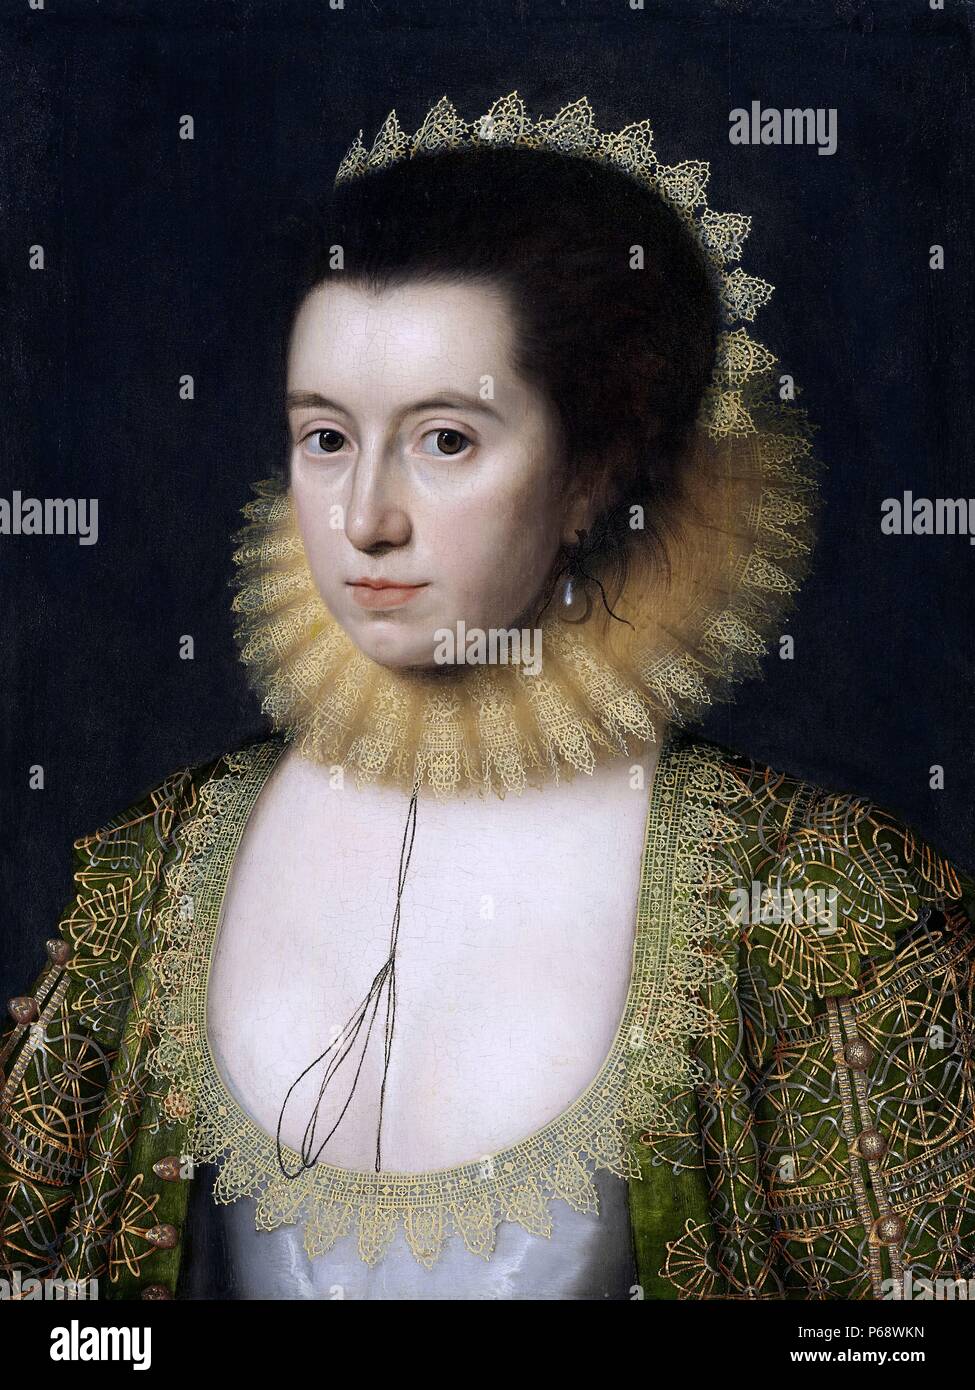 Lady Anne Clifford by William Larkin 1618. Lady Anne Clifford, 14th Baroness de Clifford, Countess of Dorset (30 January 1590 – 22 March 1676) Stock Photo